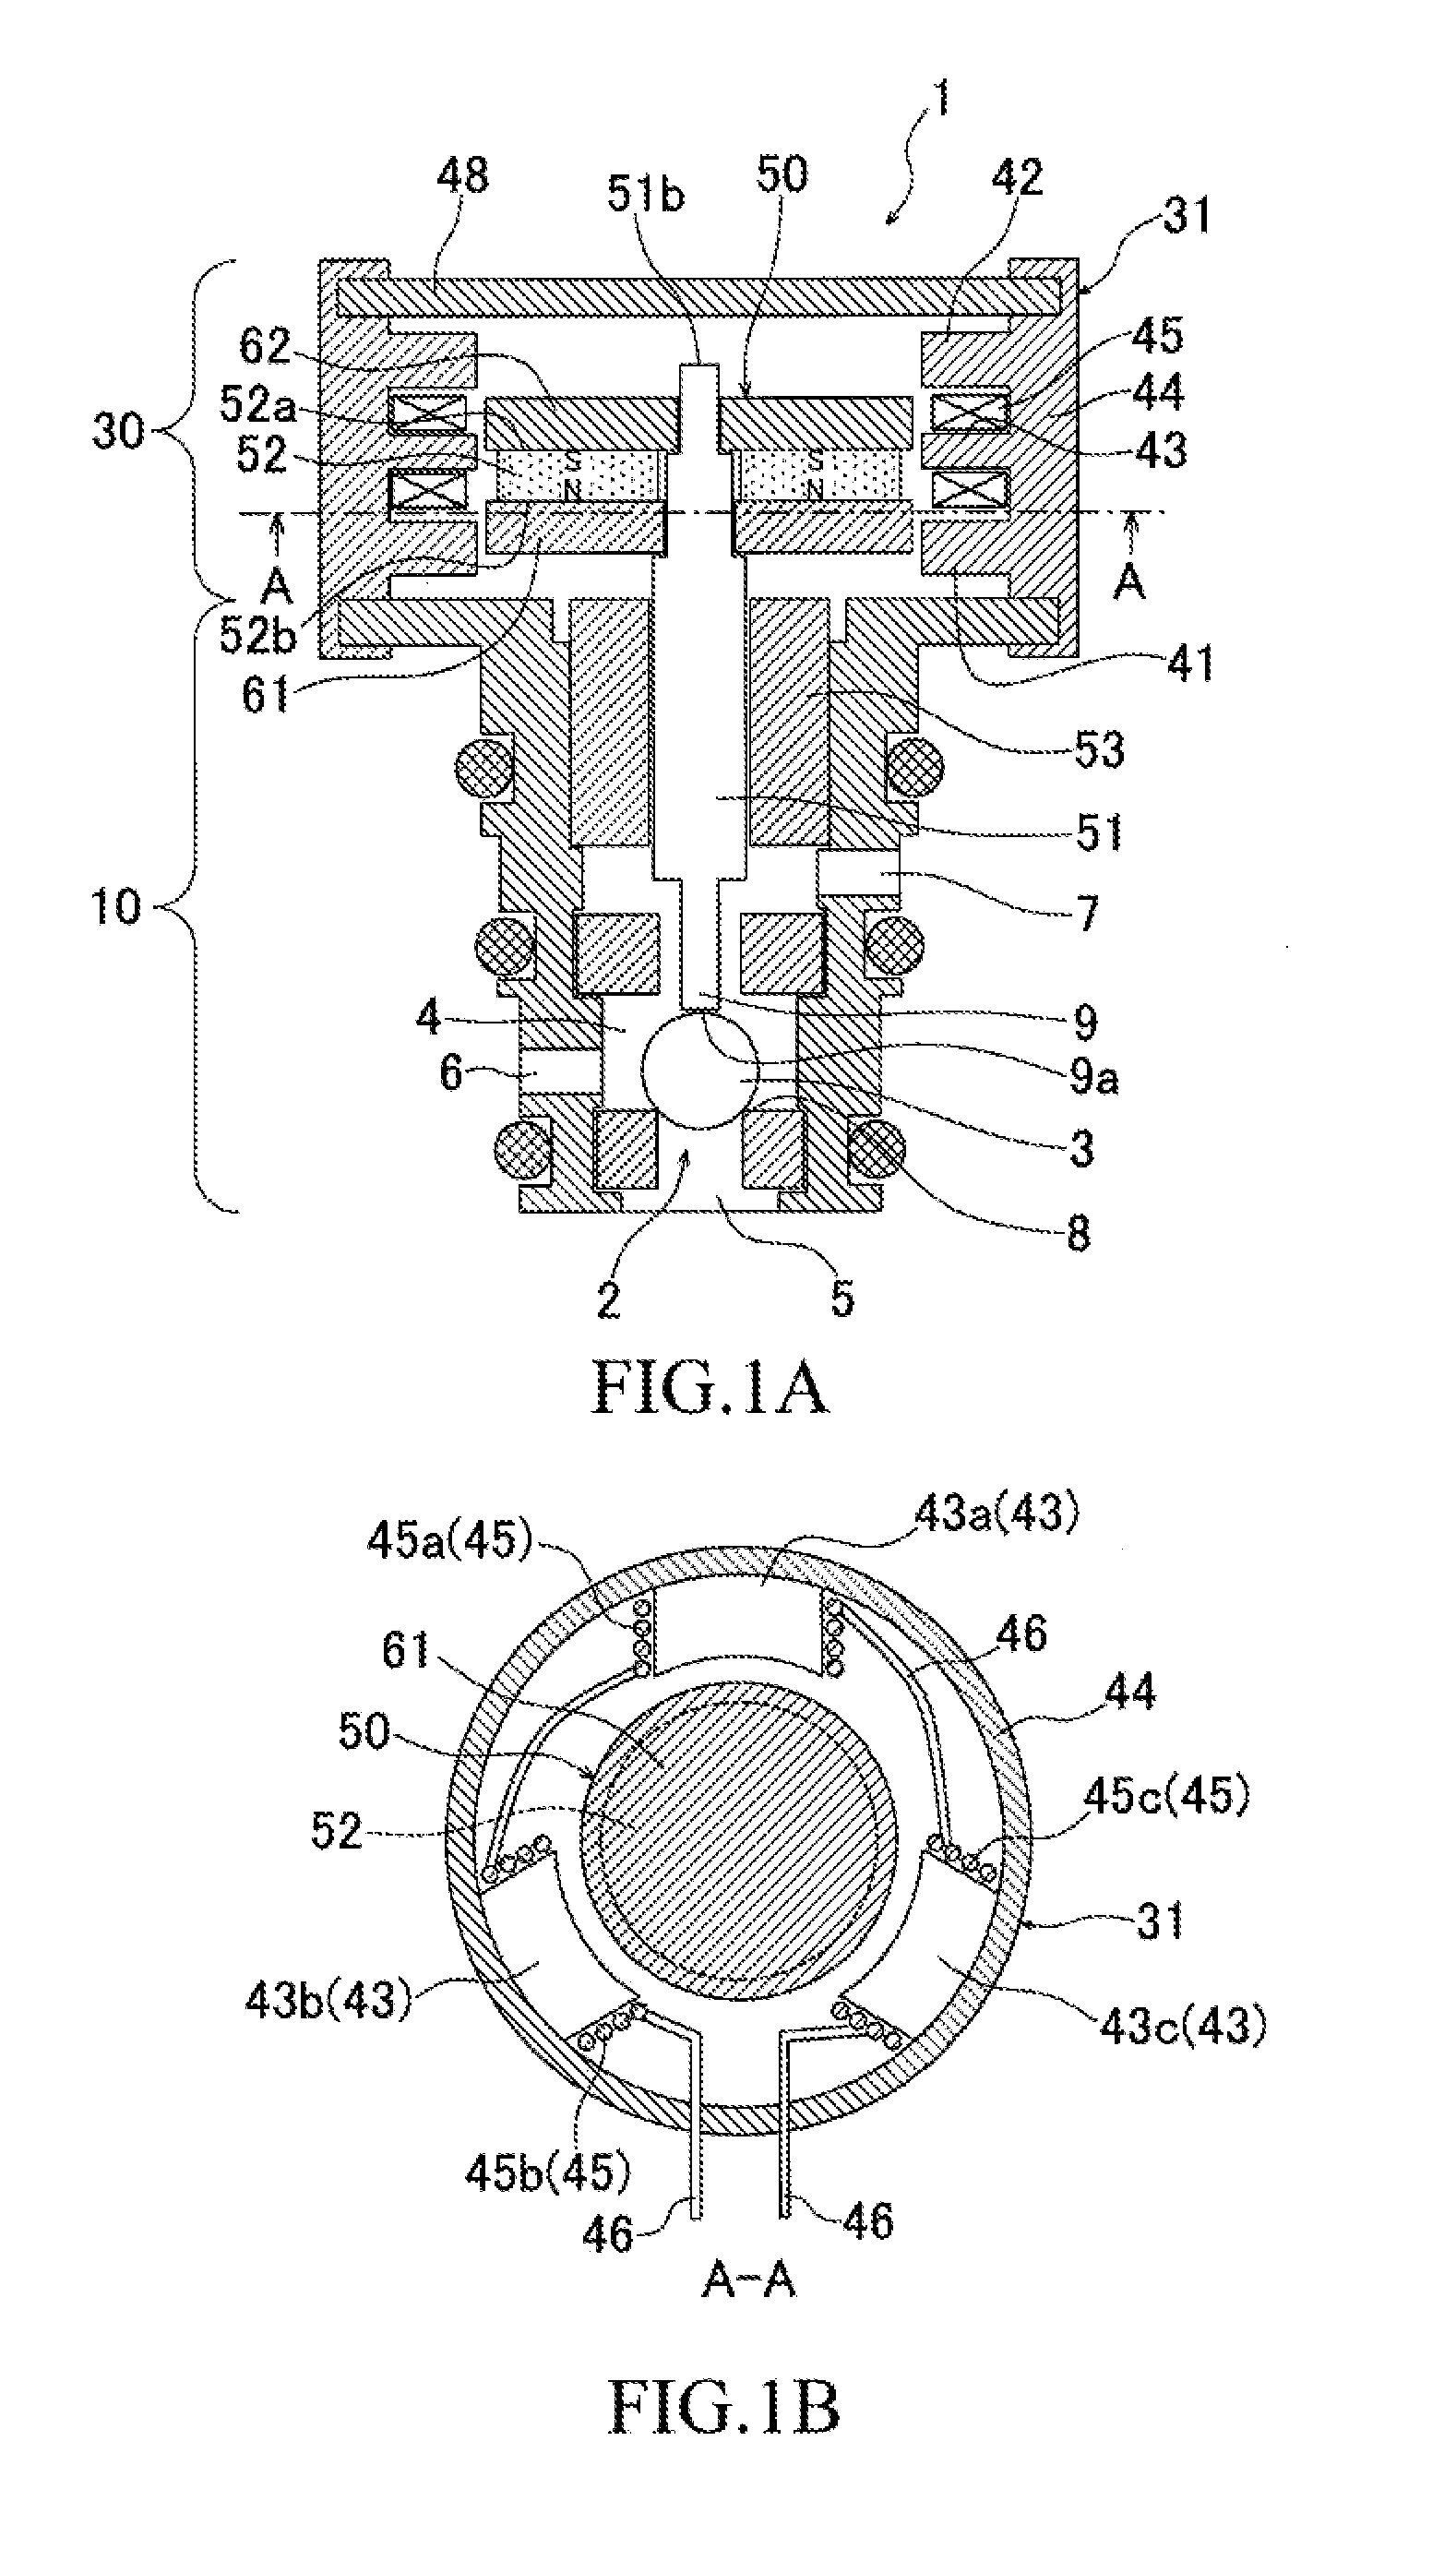 Electromagnetic actuator and solenoid-valve device